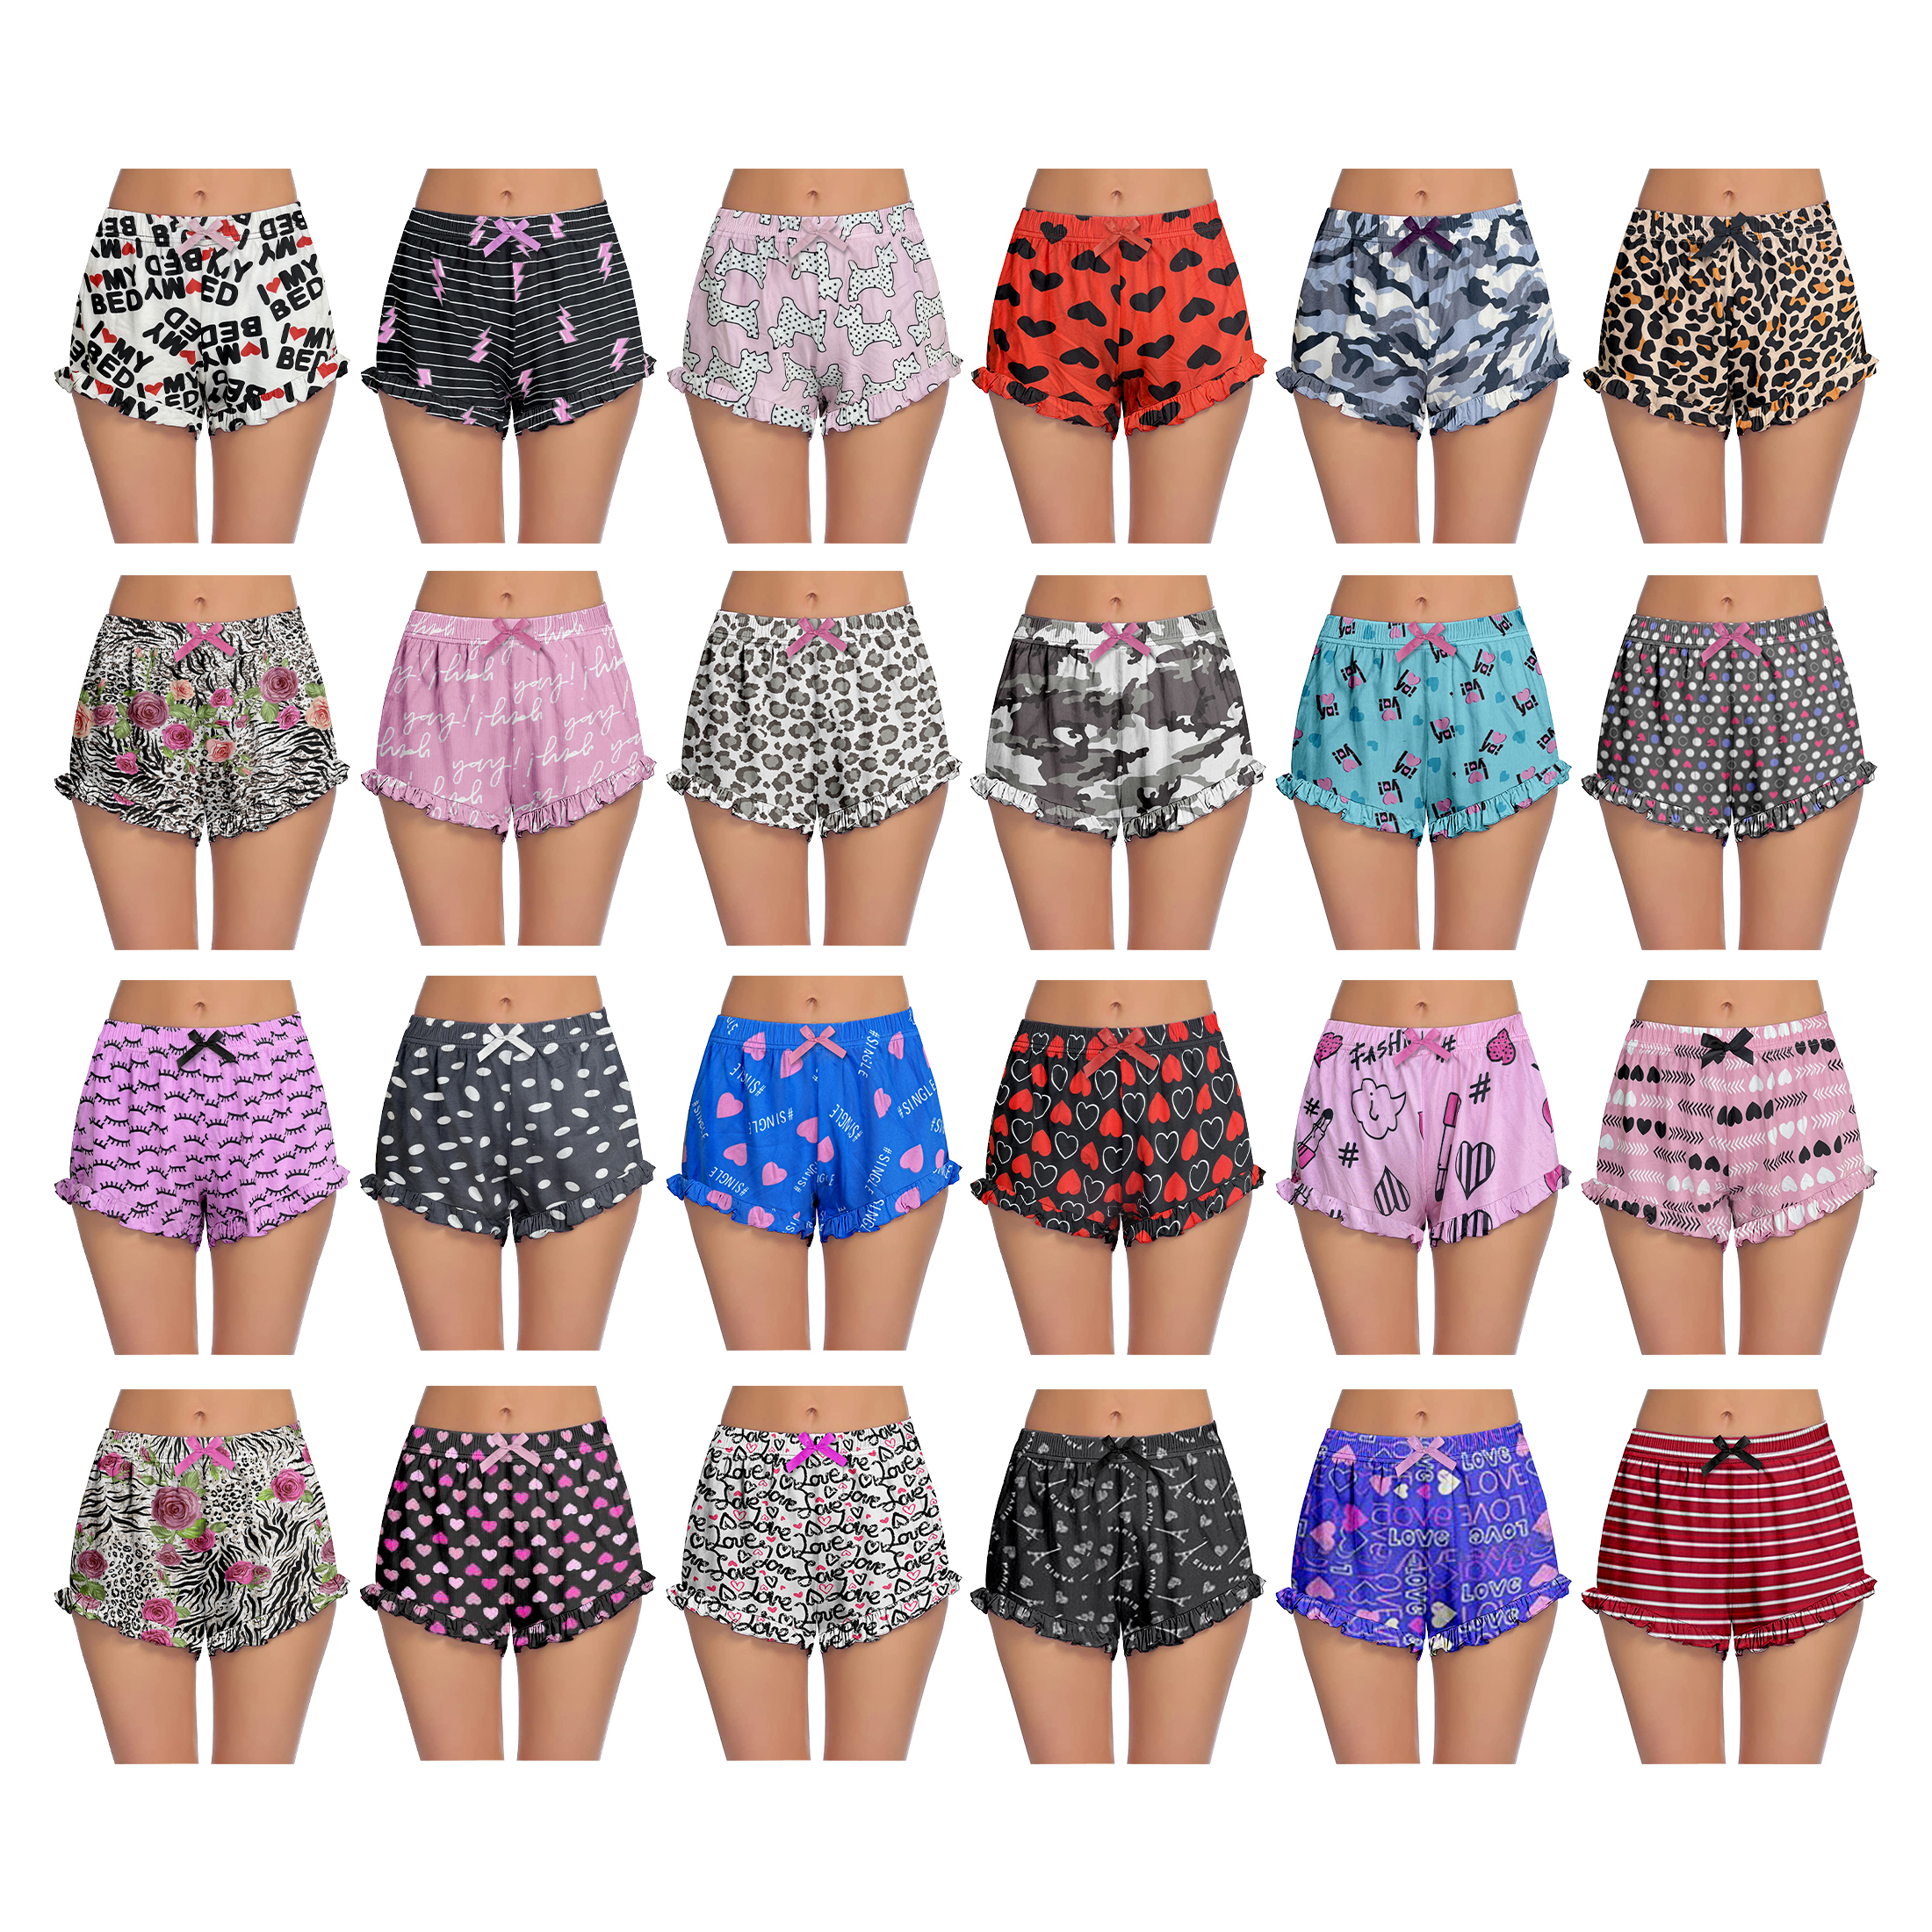 6-Pack Women's Casual Printed Pajama Shorts Soft Stretchy Relaxed Fit Ladies Summer Yoga Bottoms - L